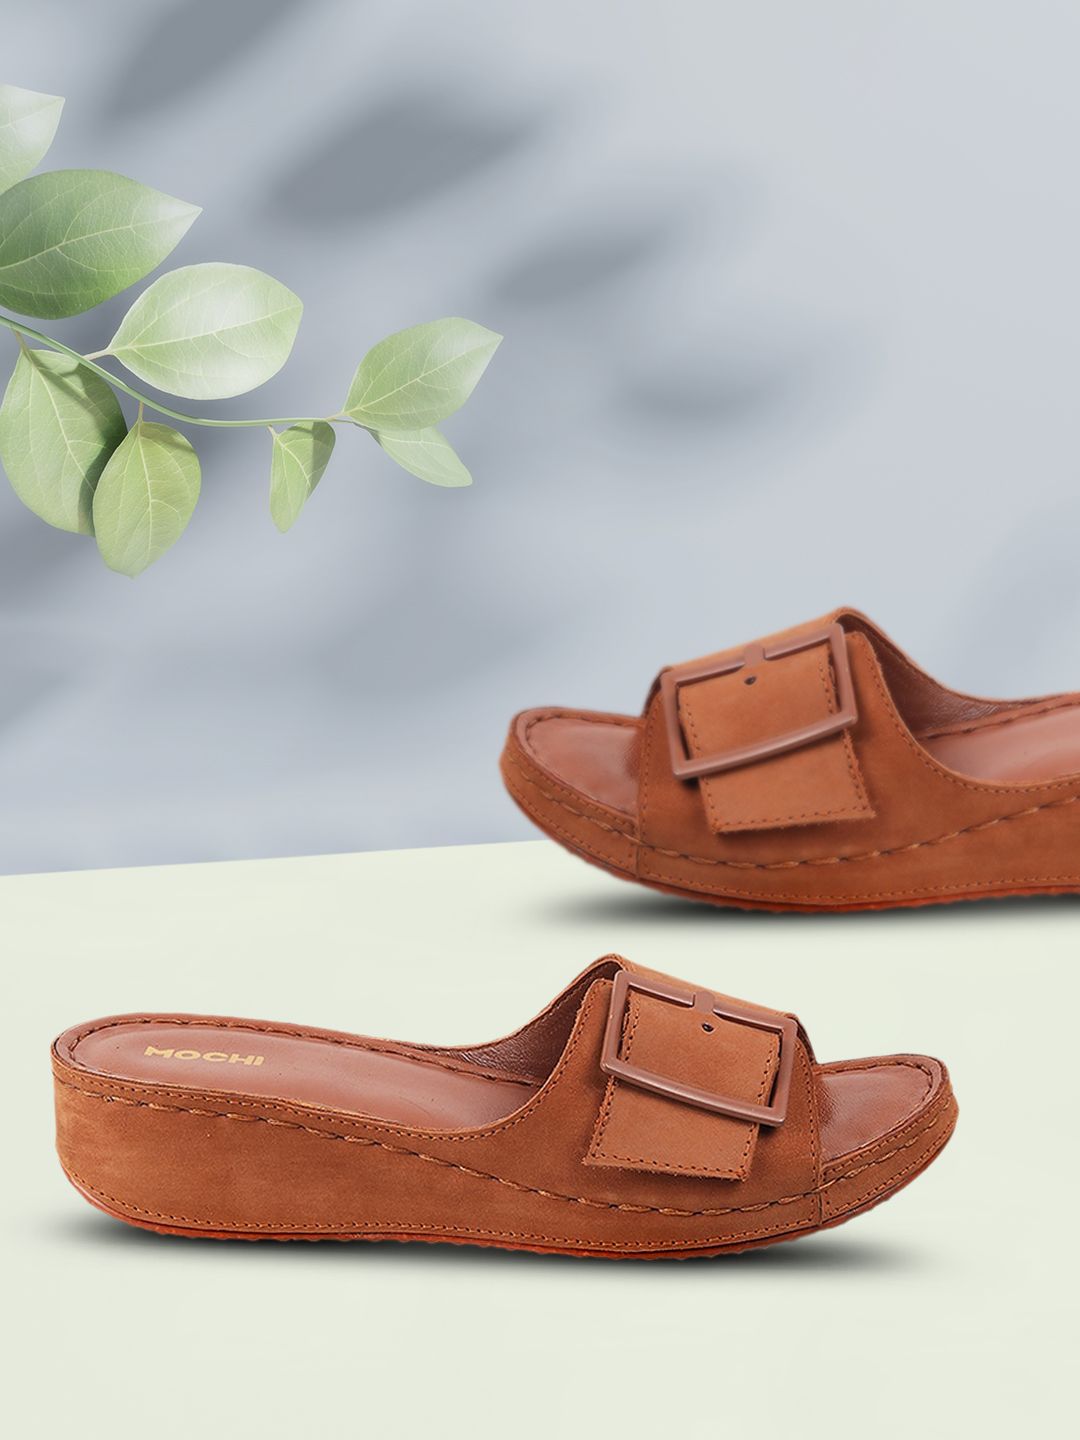 Mochi Tan Open Toe Wedges with Buckles Price in India